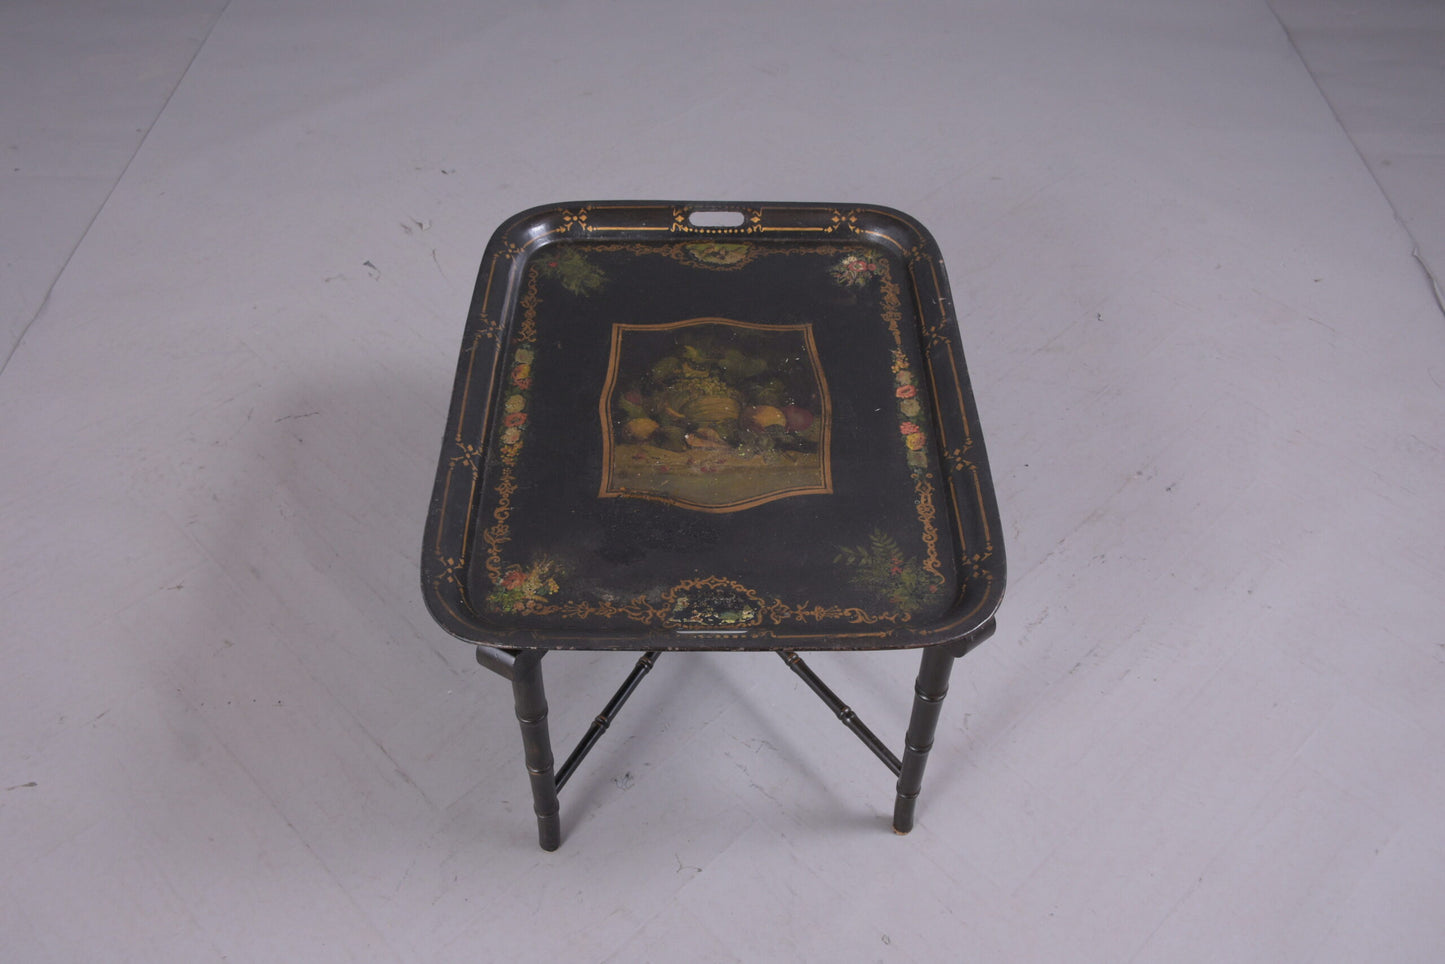 Antique Tole Tray Table